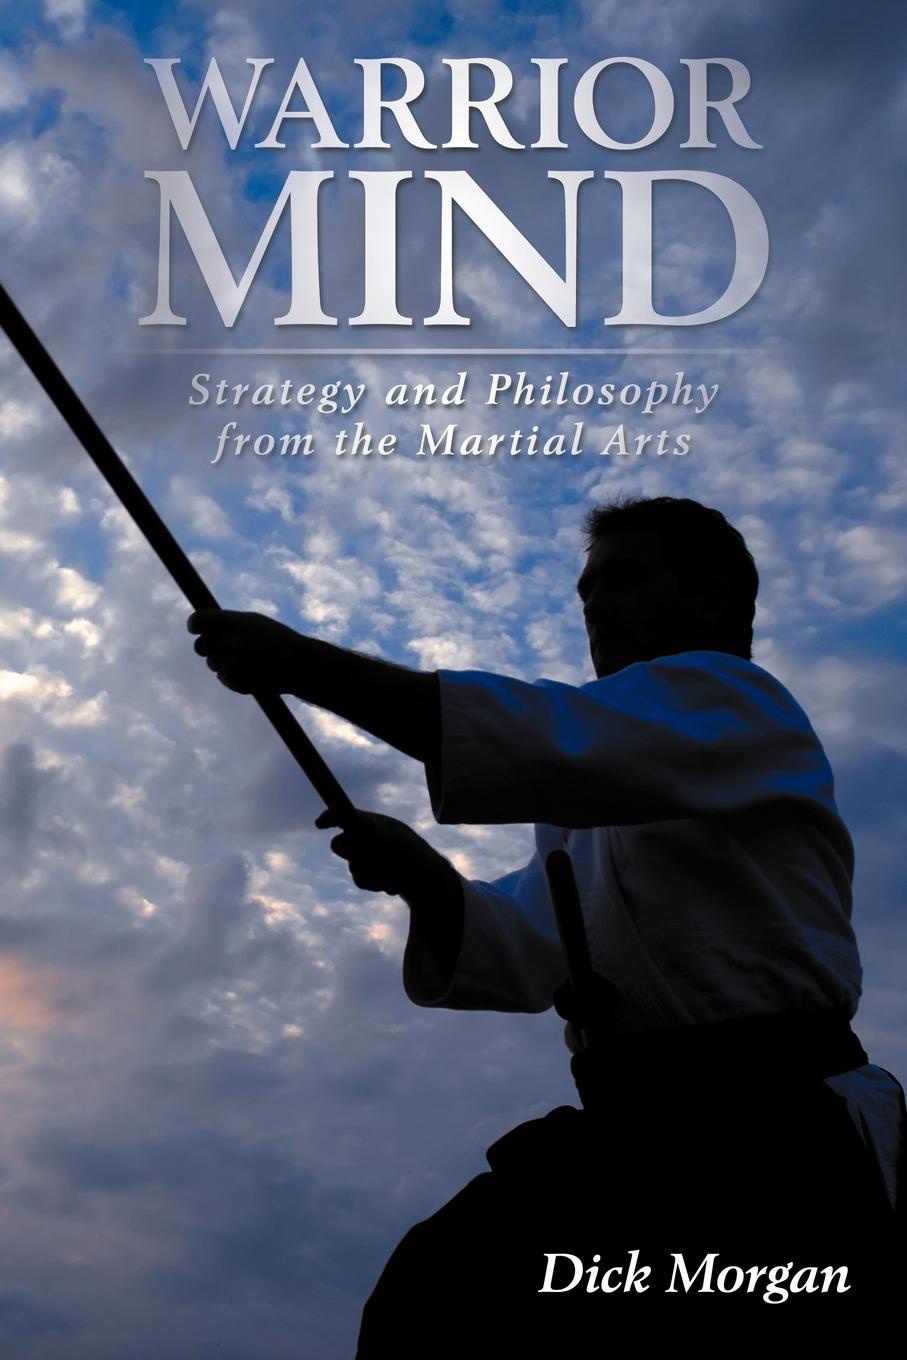 Warrior Mind. Strategy and Philosophy from the Martial Arts